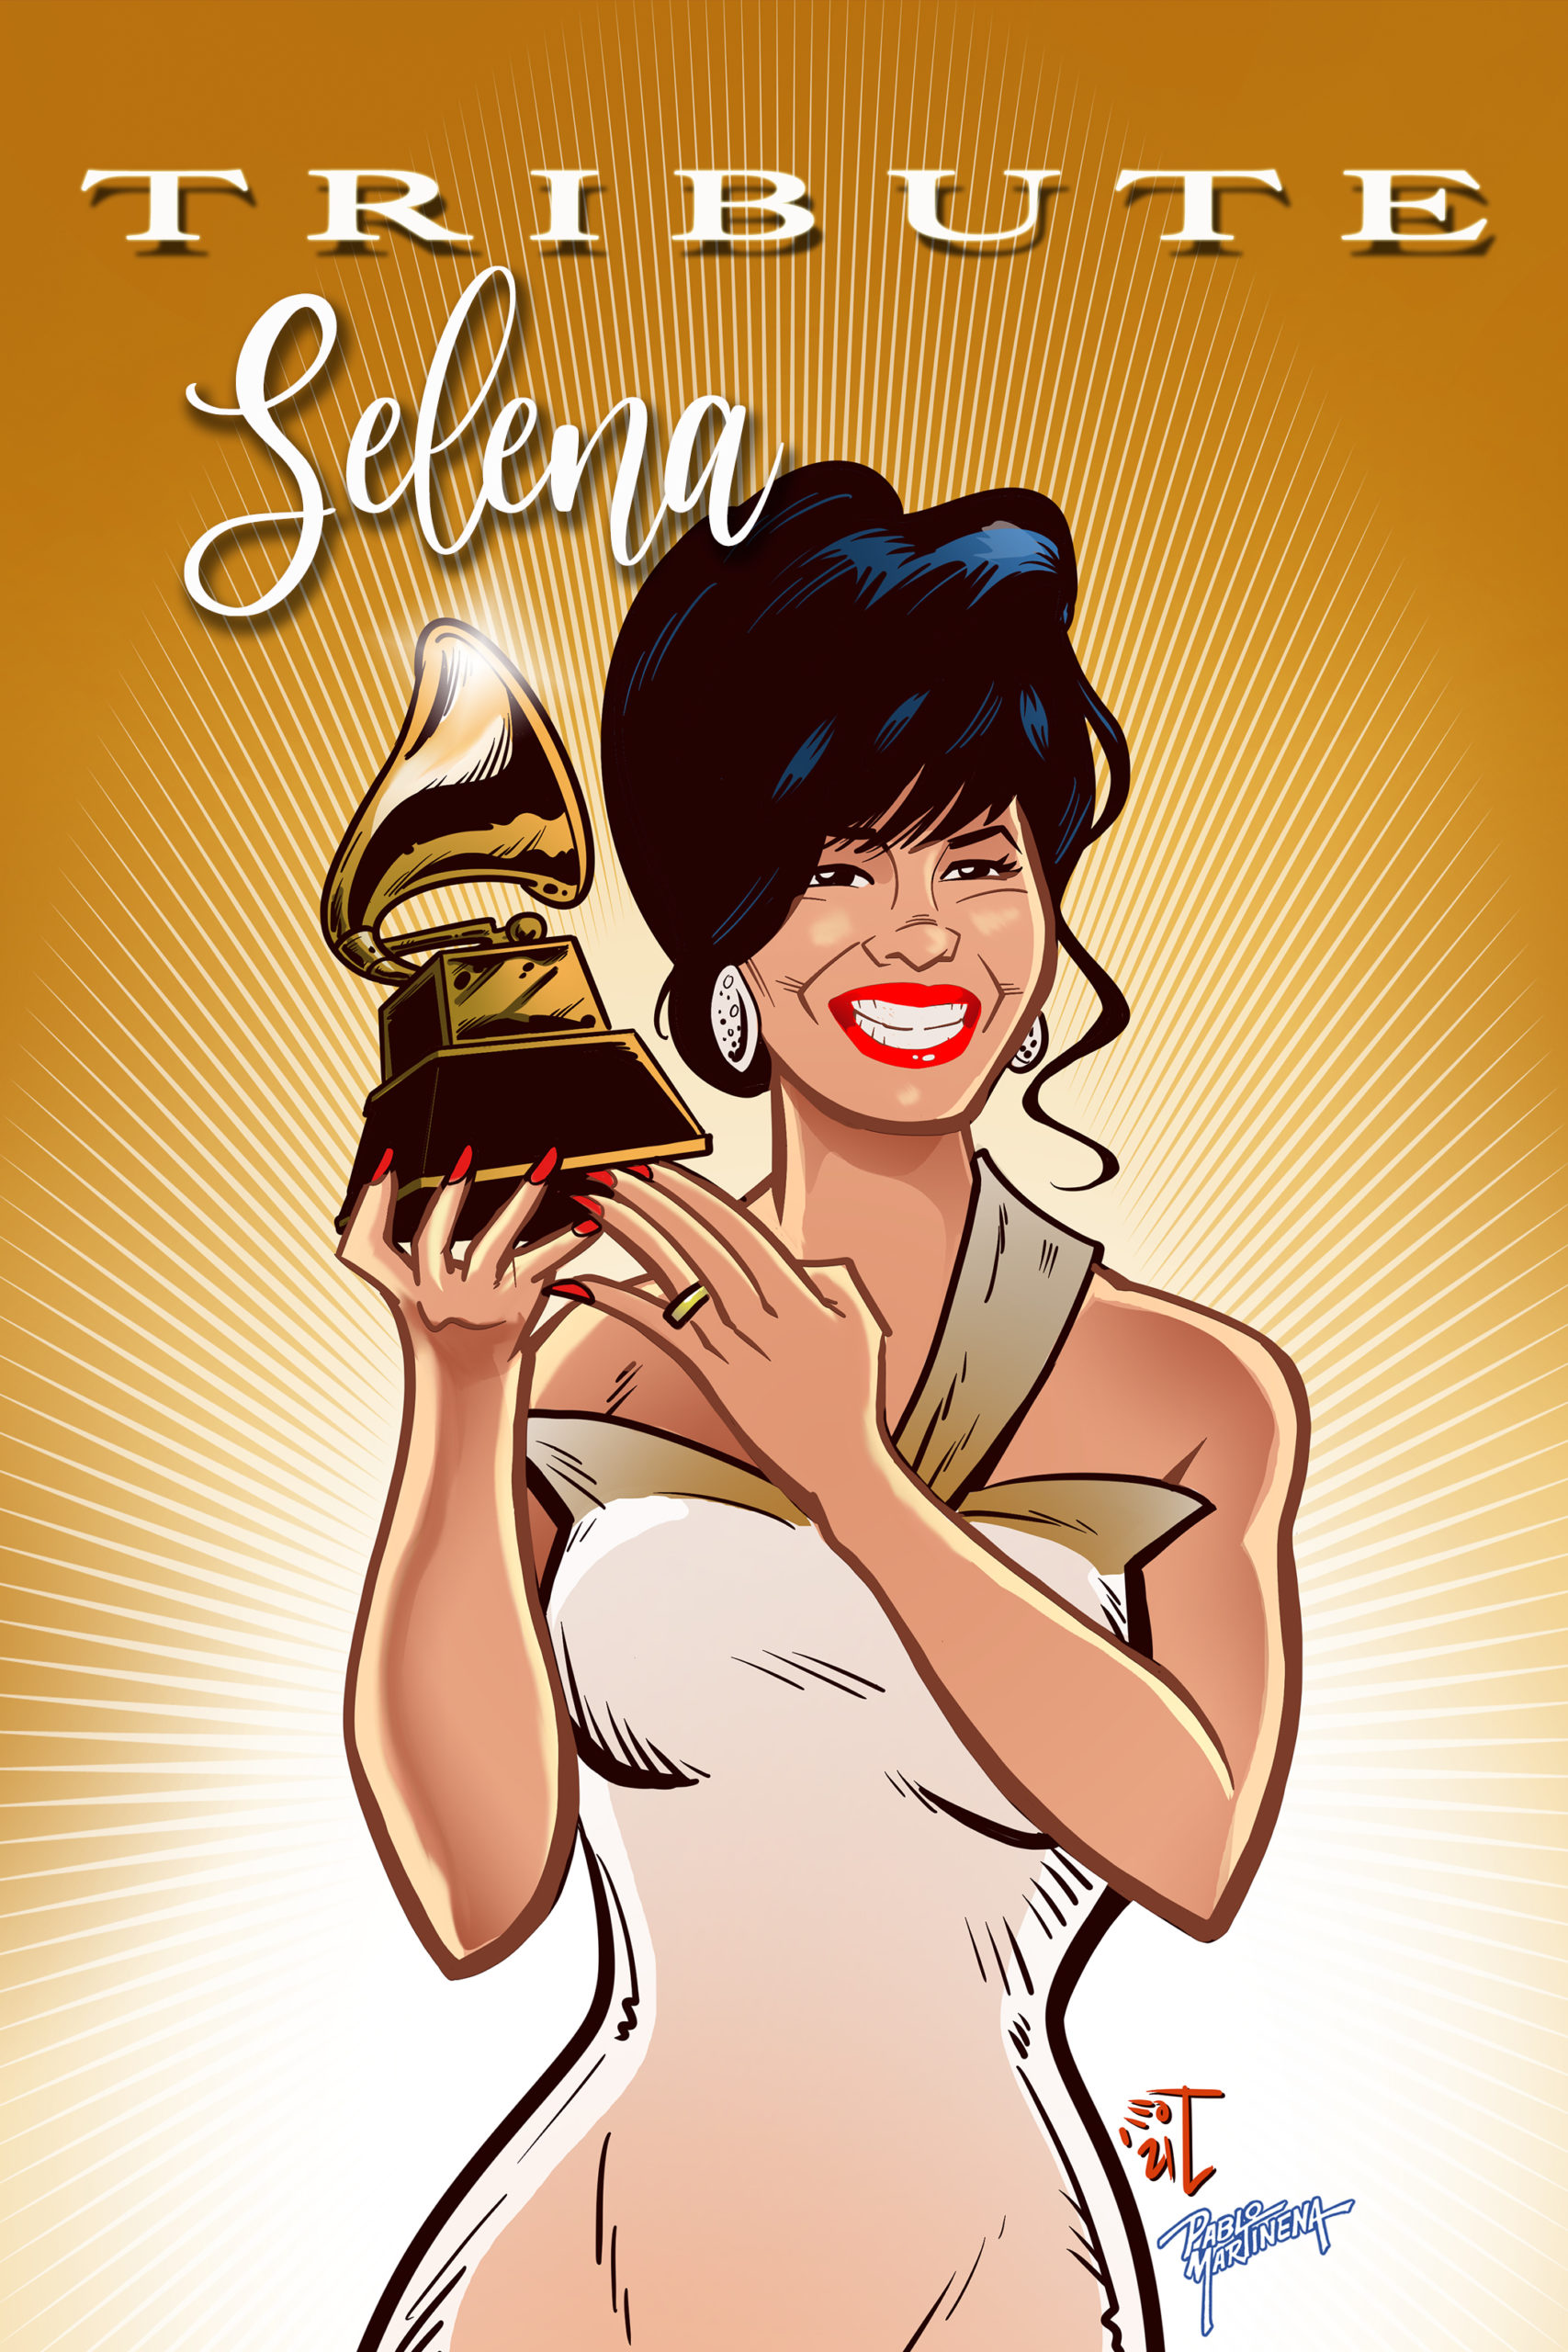 LATIN ICON SELENA QUINTANILLA COMIC BOOK BIOGRAPHY EXPANDED FOR HER  BIRTHDAY - TidalWave Productions